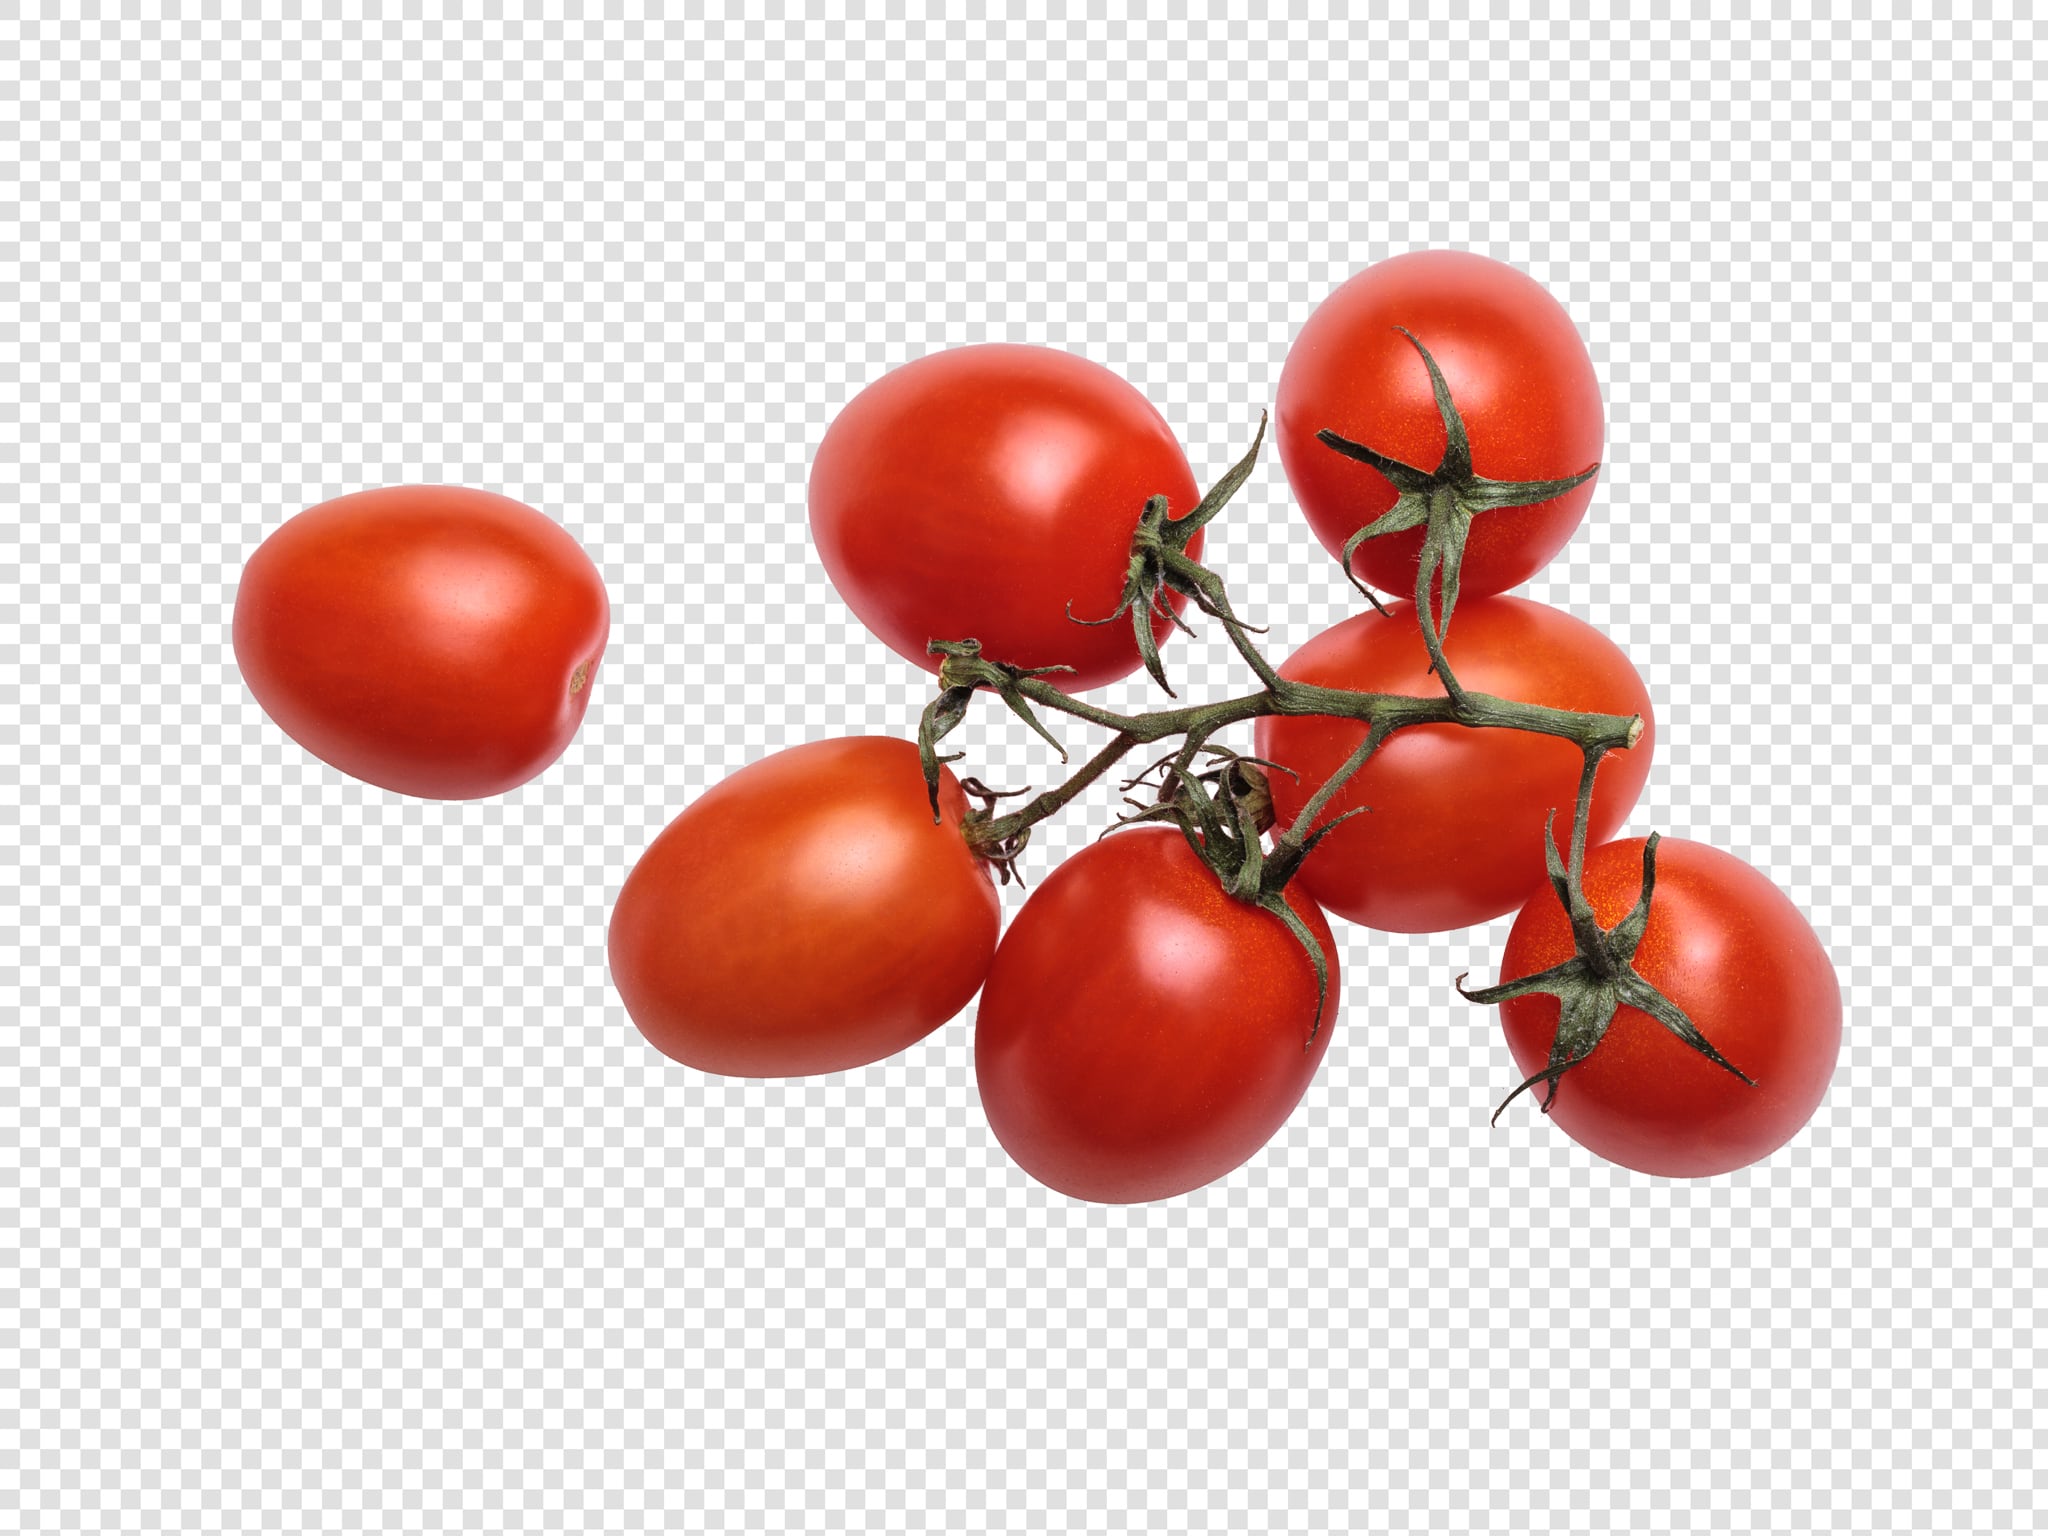 Cherry image asset with transparent background